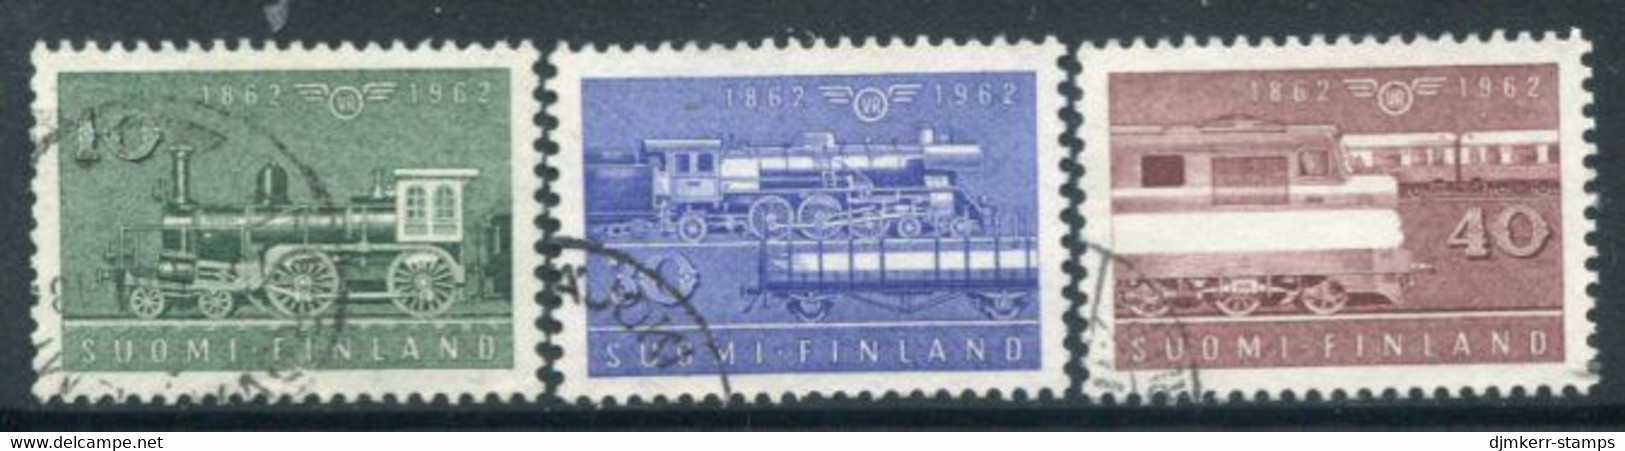 FINLAND 1962 Railway Centenary Used.  Michel 543-45 - Used Stamps